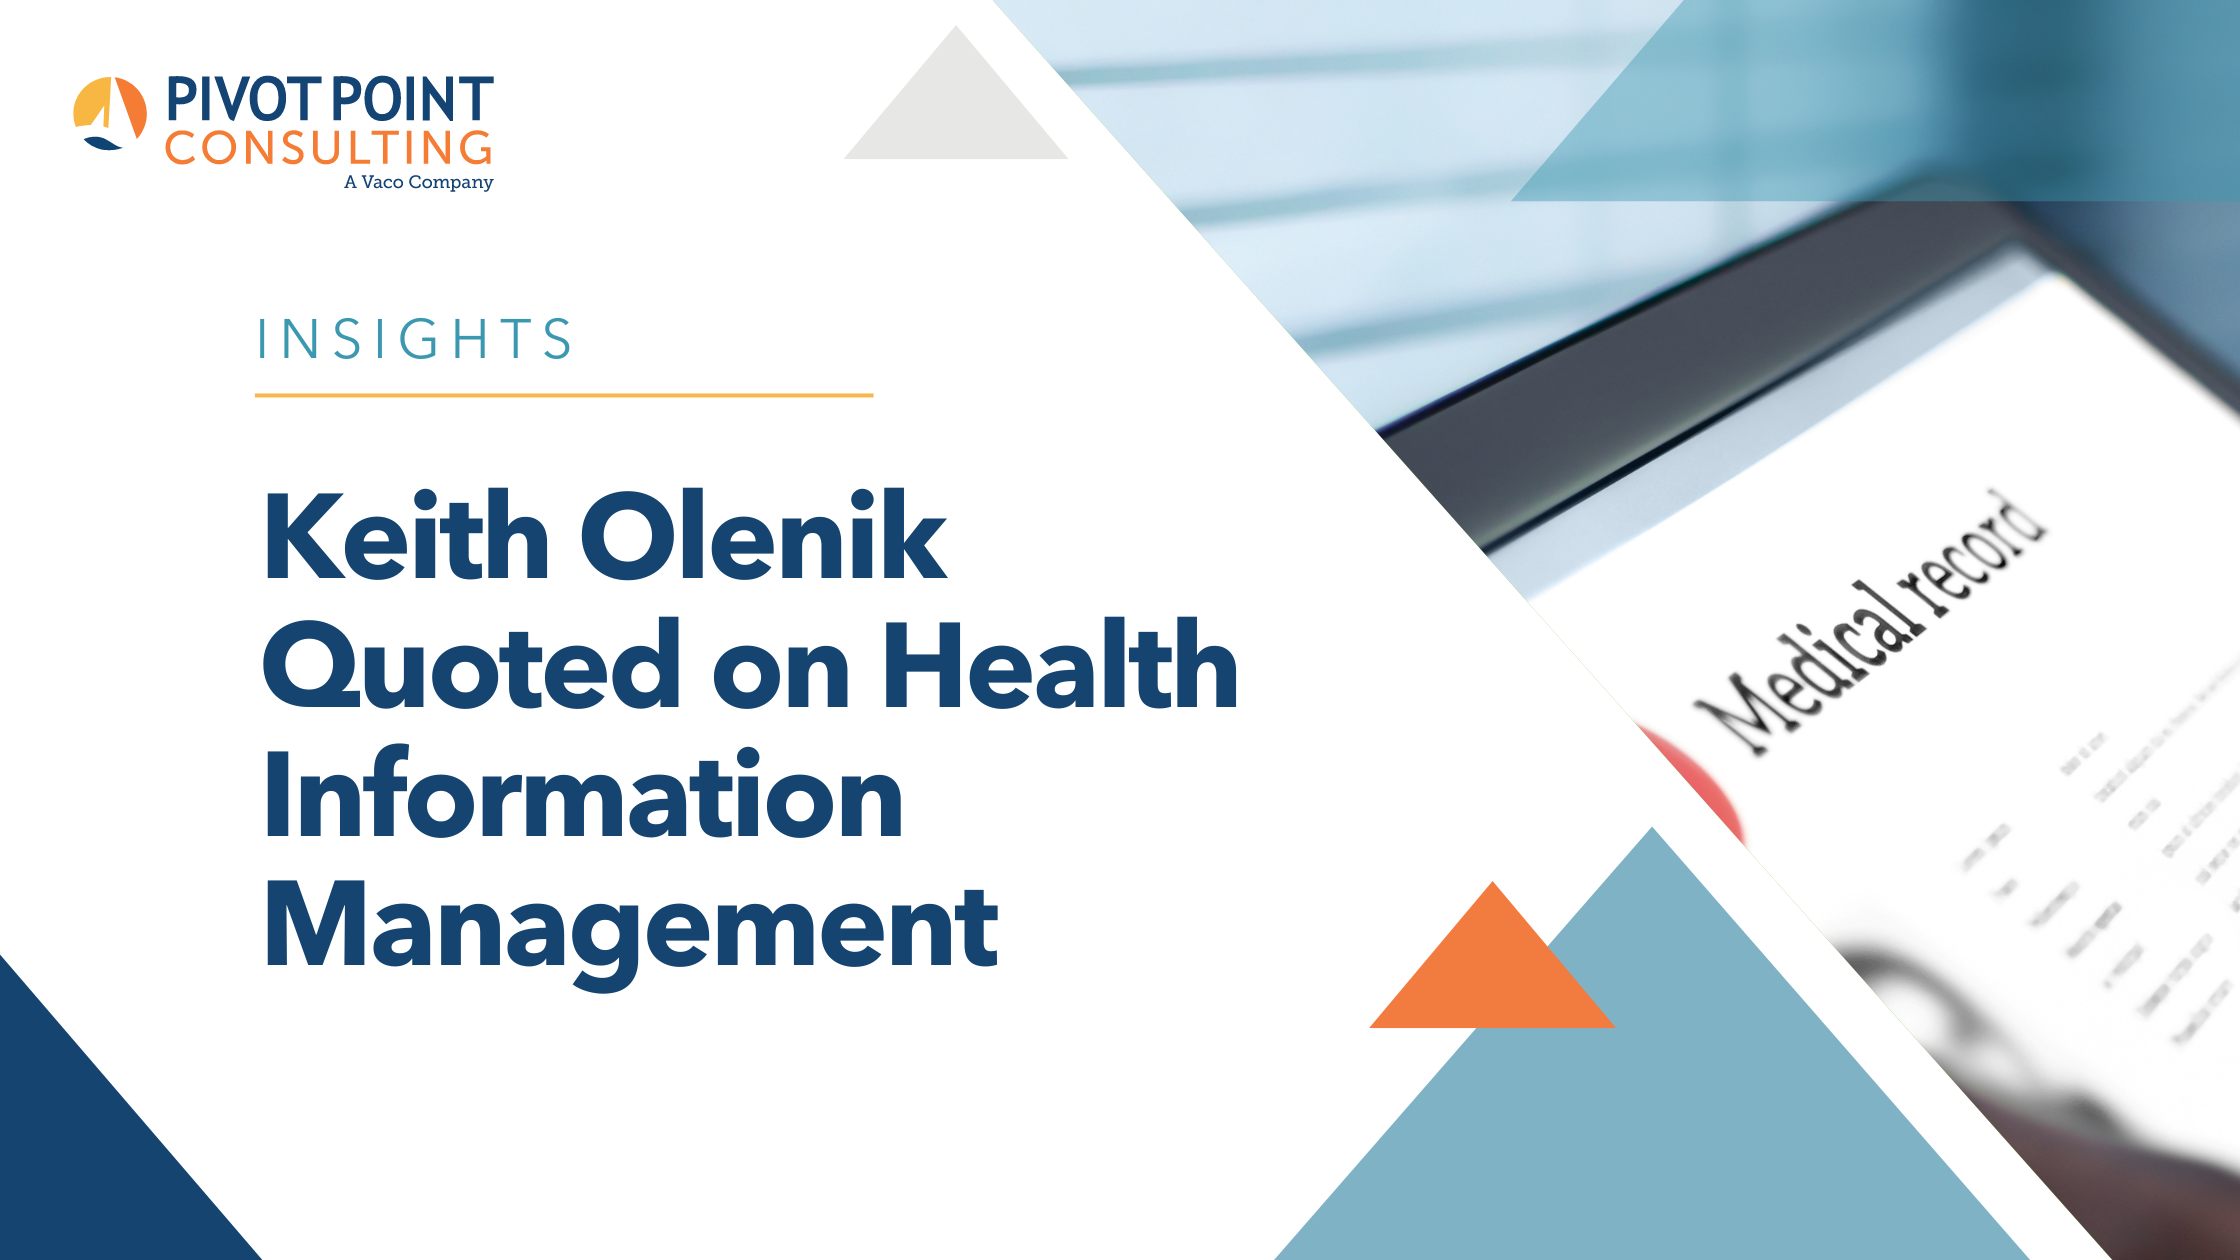 Keith Olenik Quoted on Health Information Management blog post